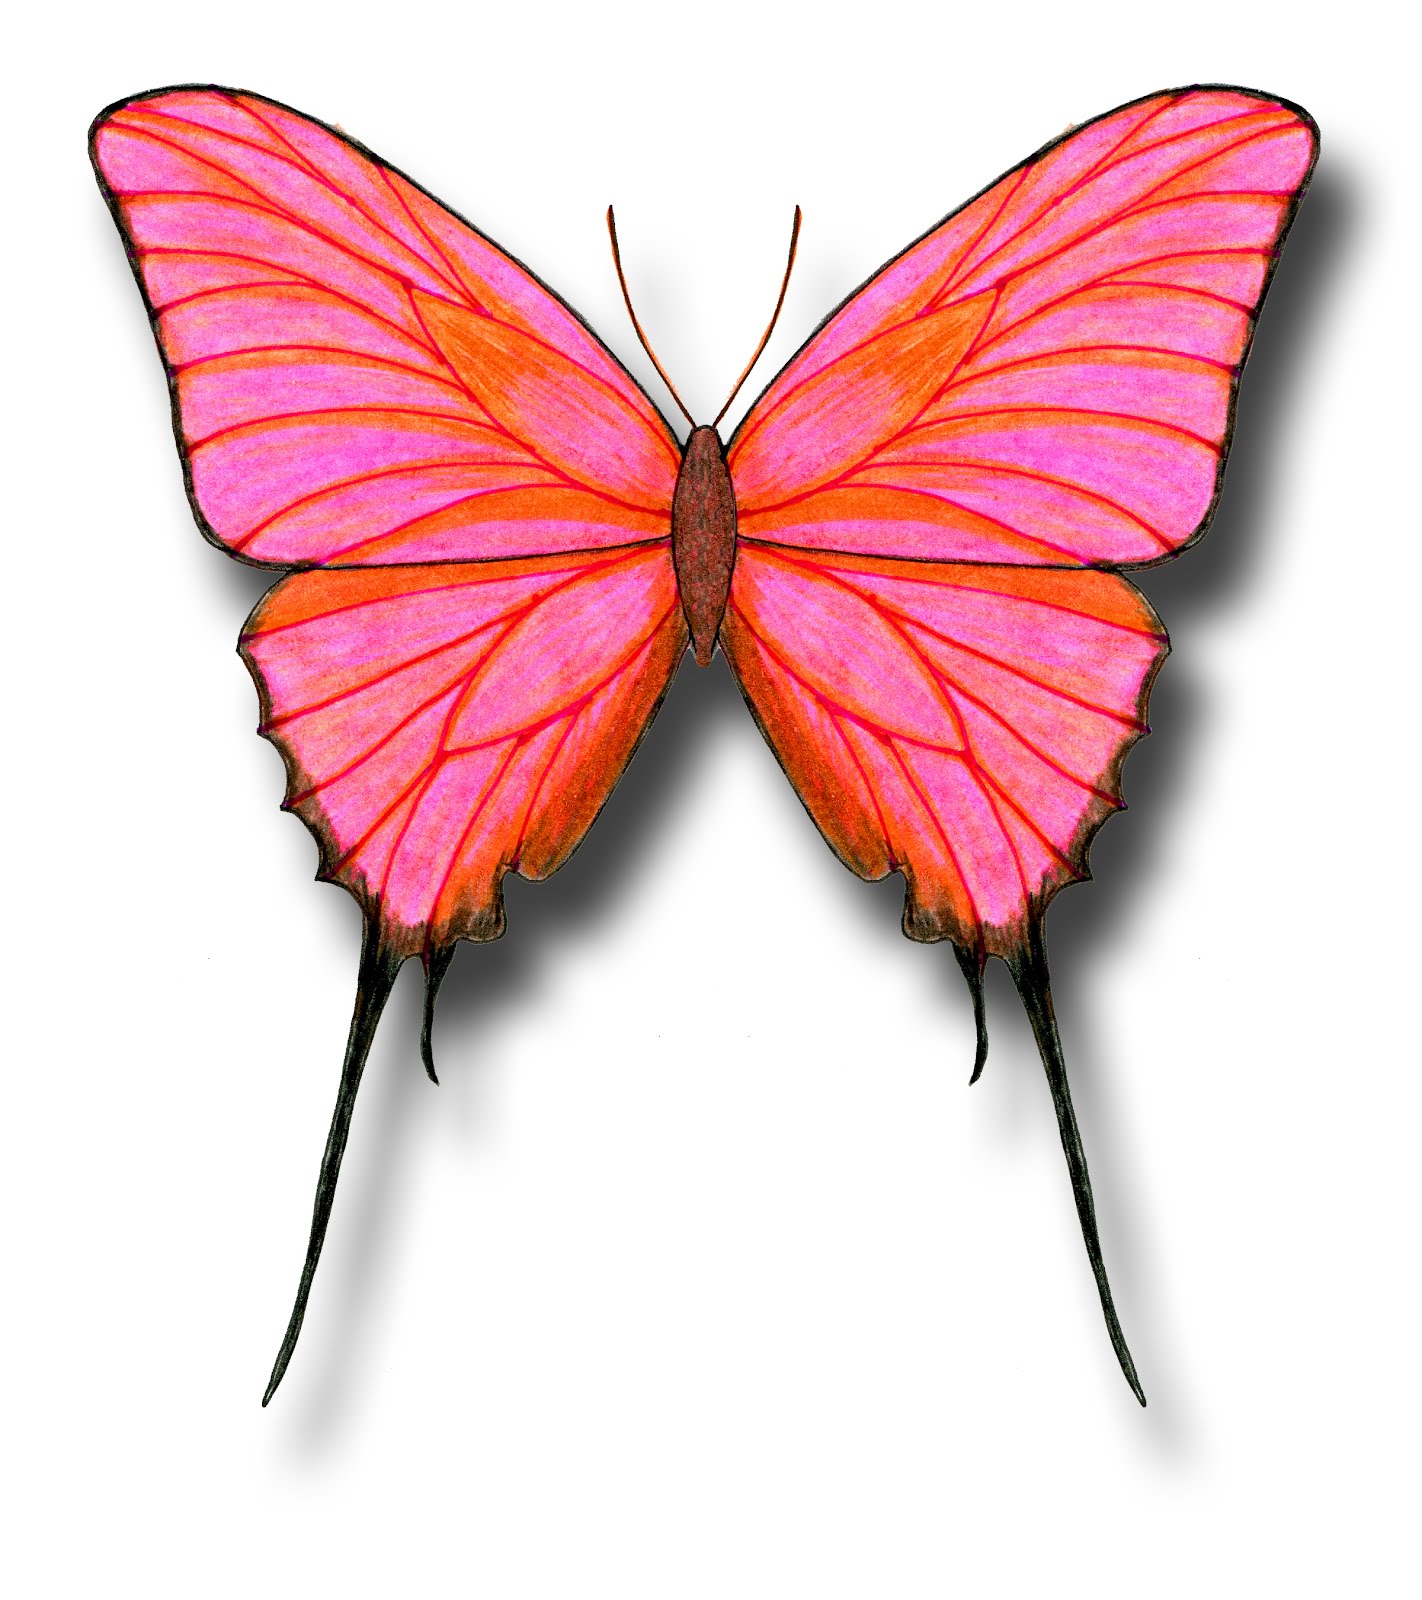 Butterfly Drawings In Color submited images | Pic2Fly